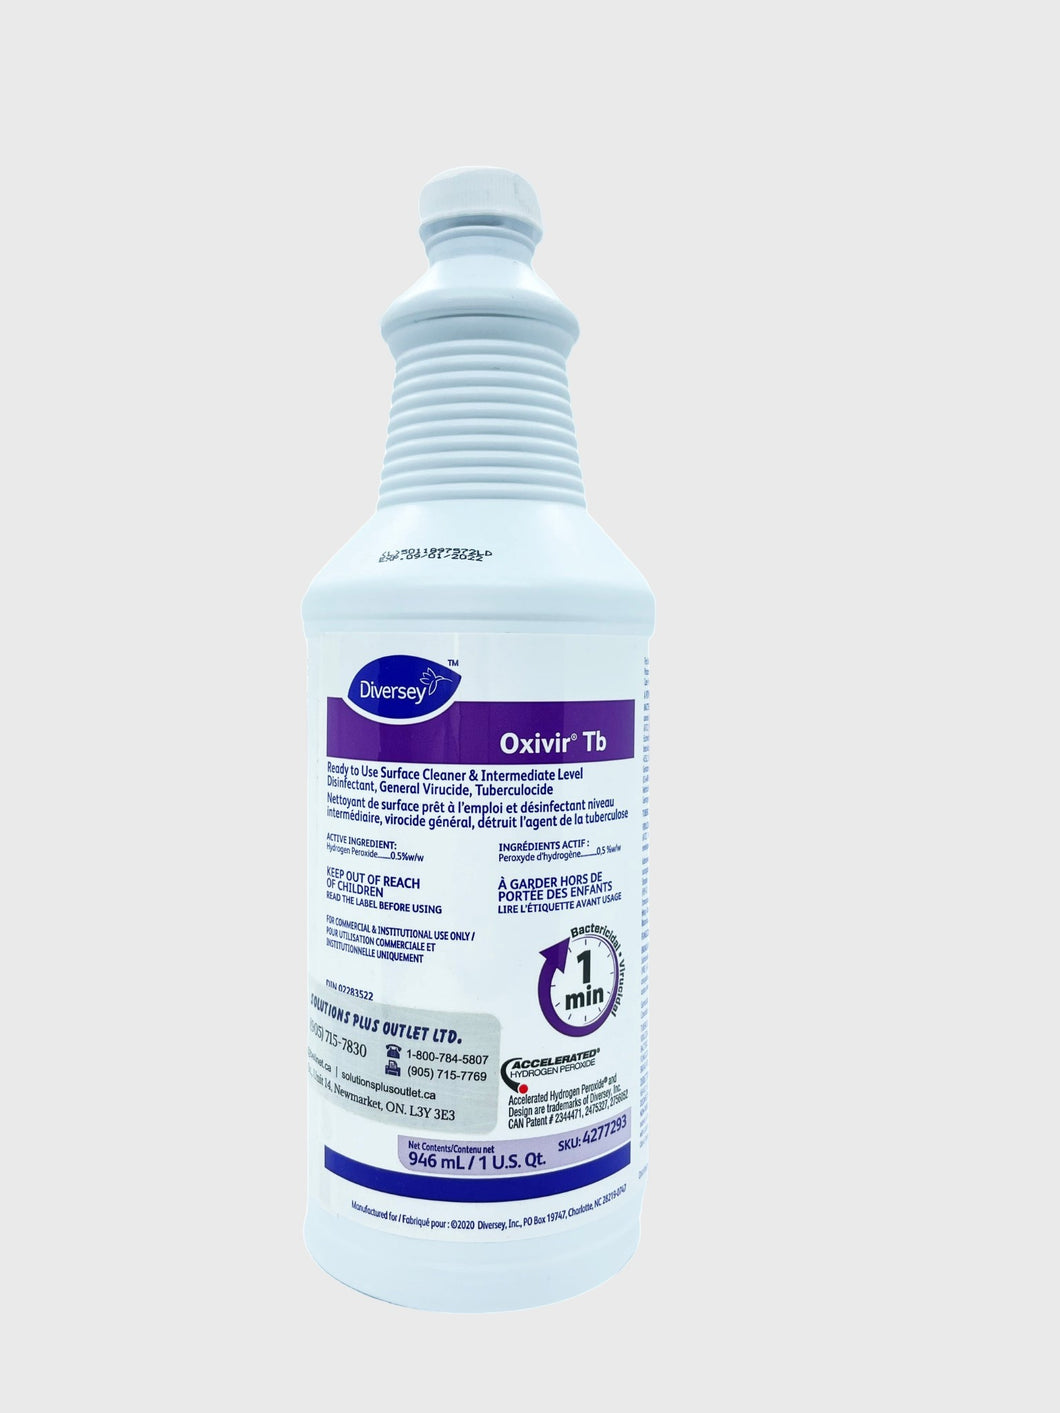 Oxivir Ready To Use disinfectant